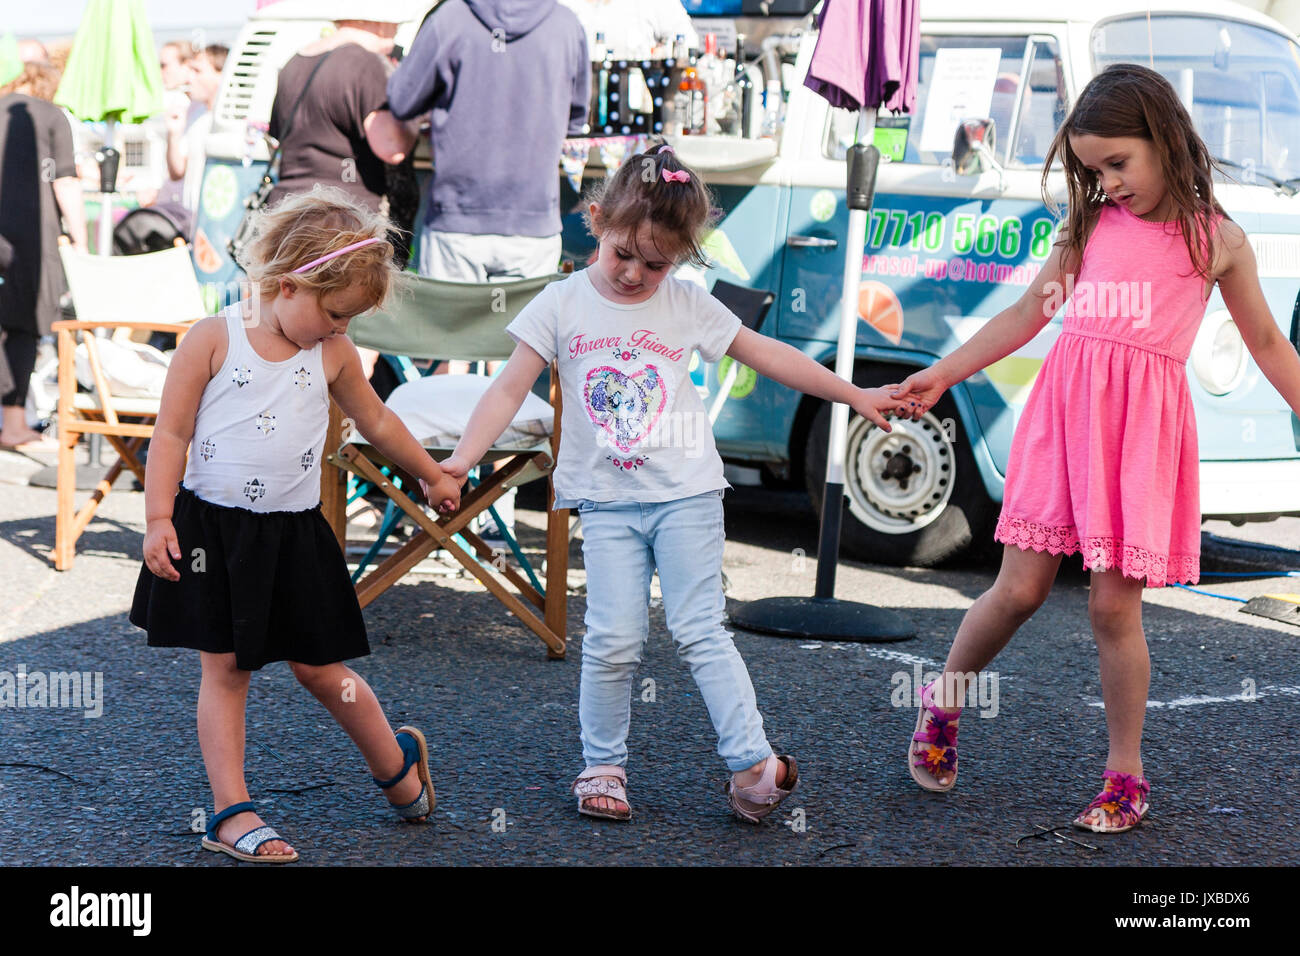 Three young Caucasian children, girls, 5-6 years old, dancing outdoors holding hands in a row. Stock Photo